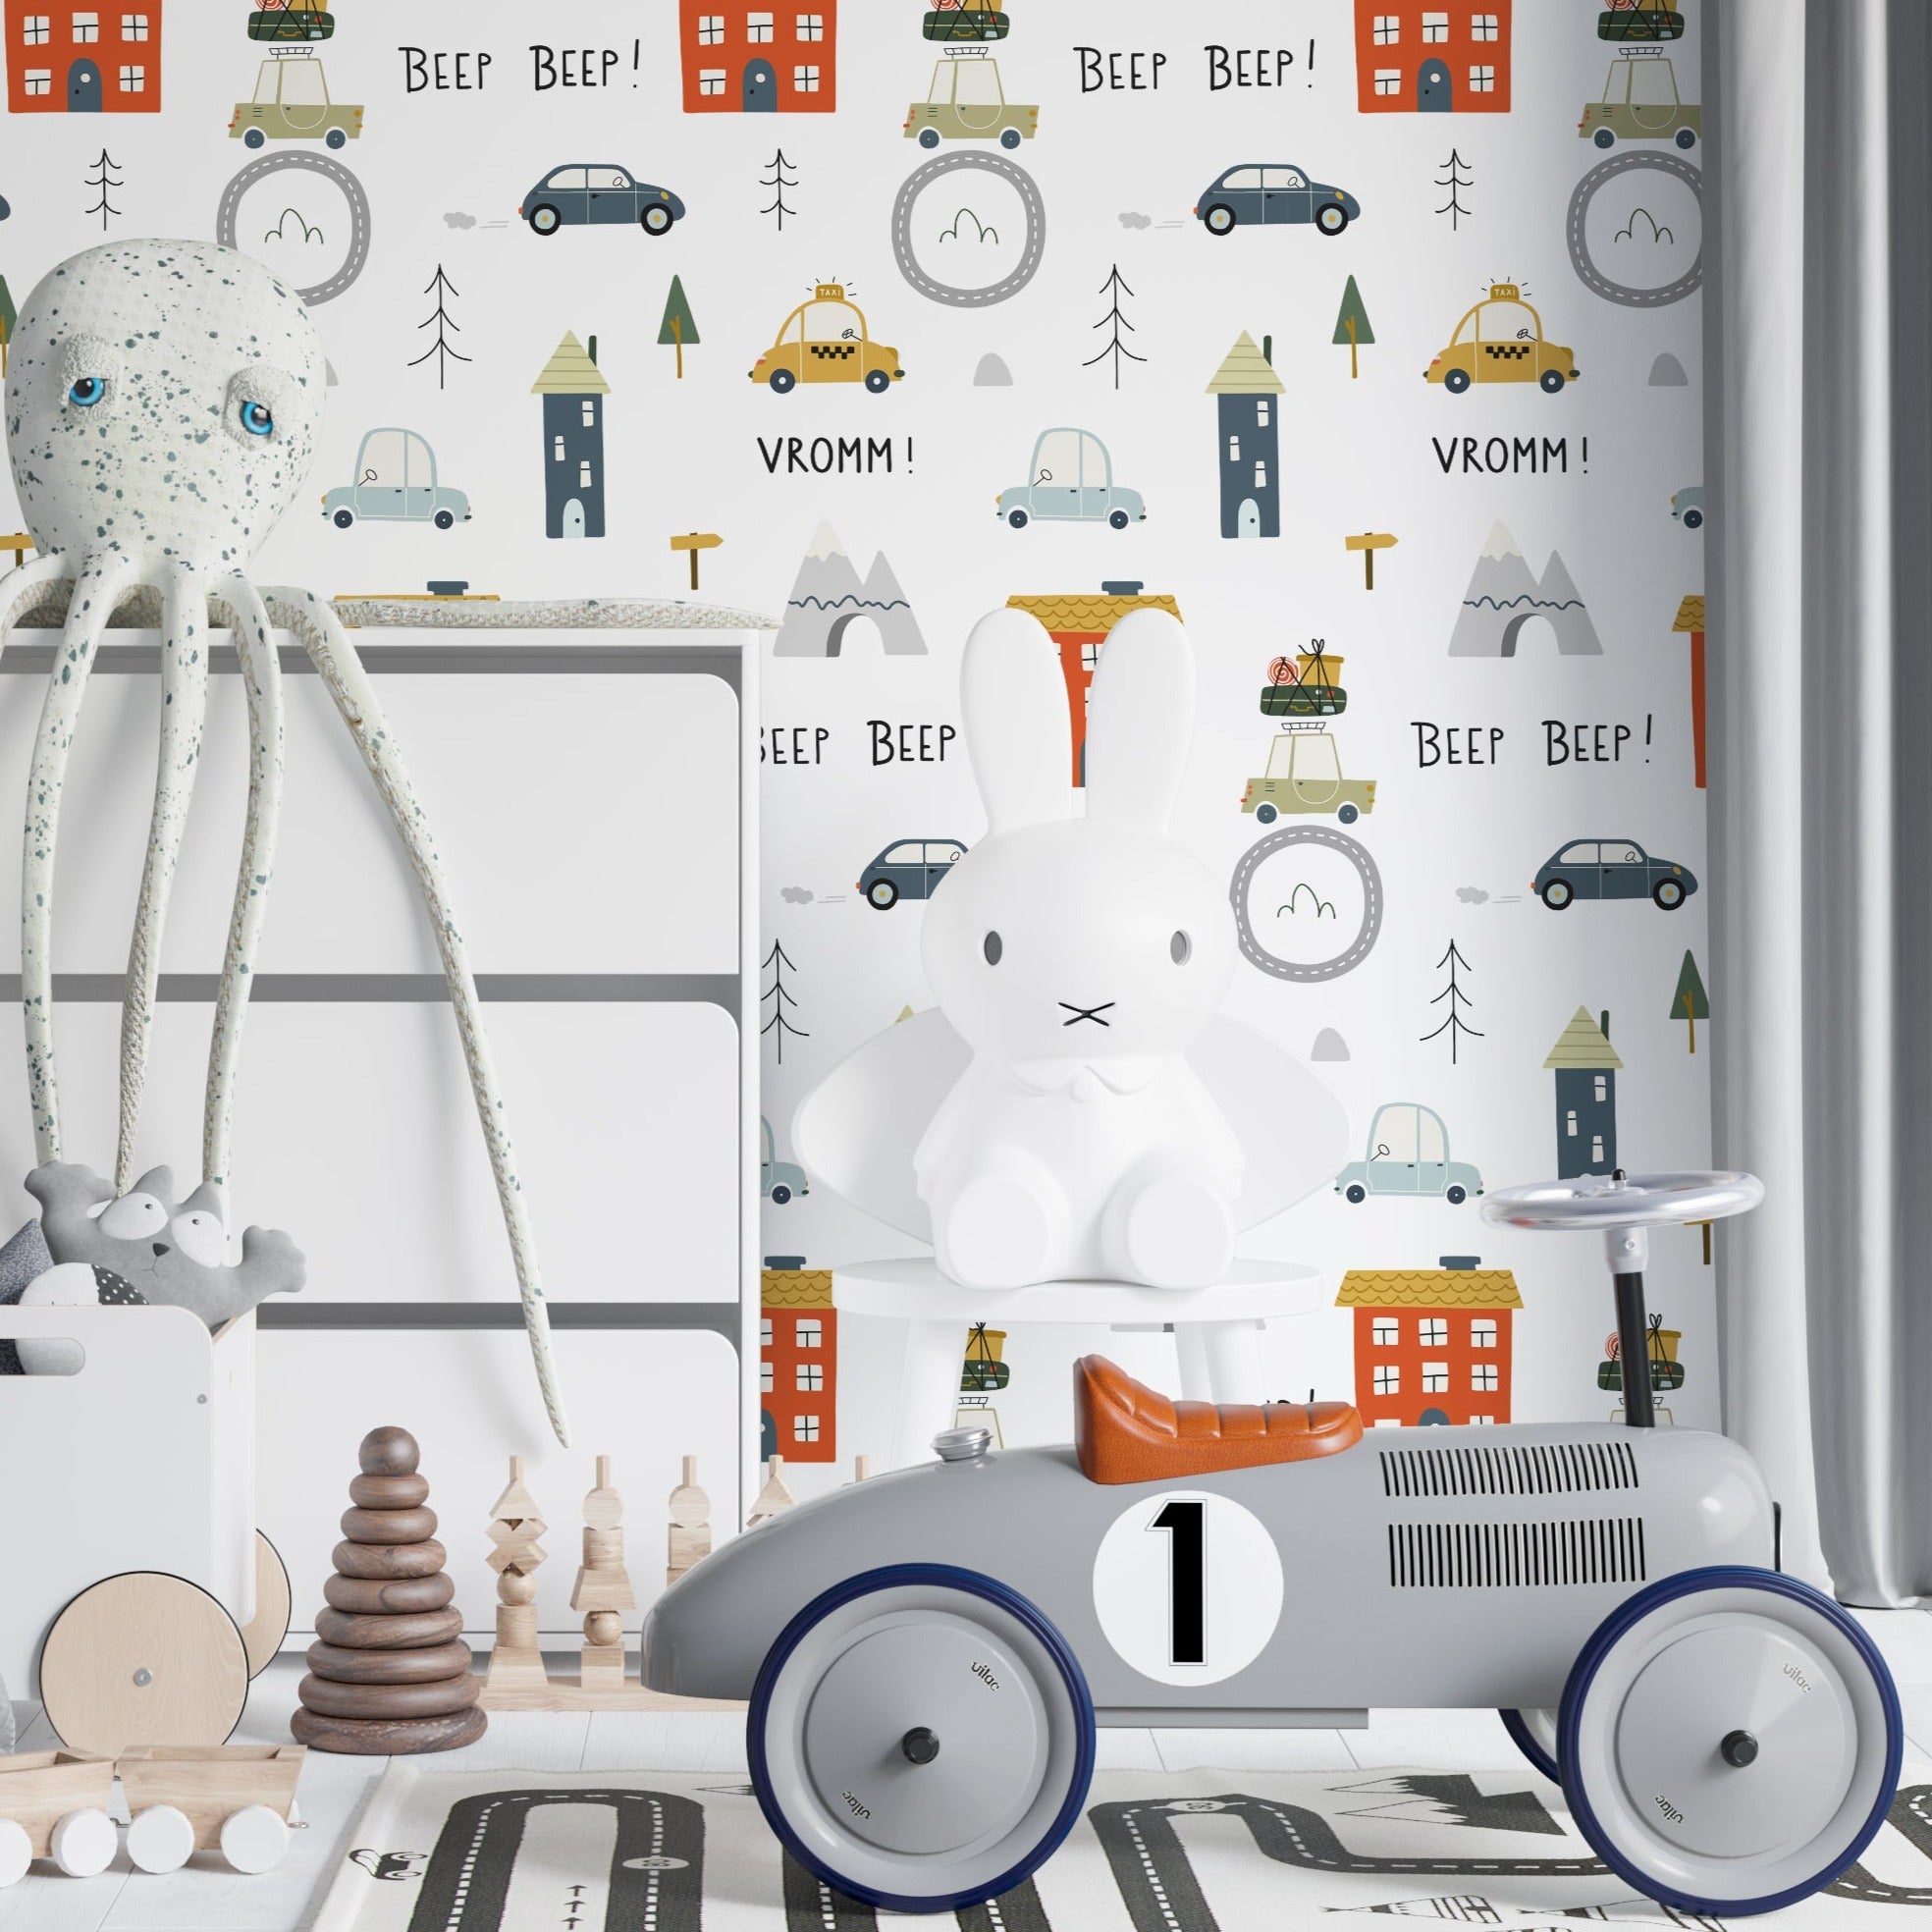 Children's nursery room adorned with Cute Cars Wallpaper 04, displaying a colorful and playful scene of animated vehicles driven by animals. The room setup includes a white crib surrounded by stuffed animals and toys, creating a lively and inviting atmosphere